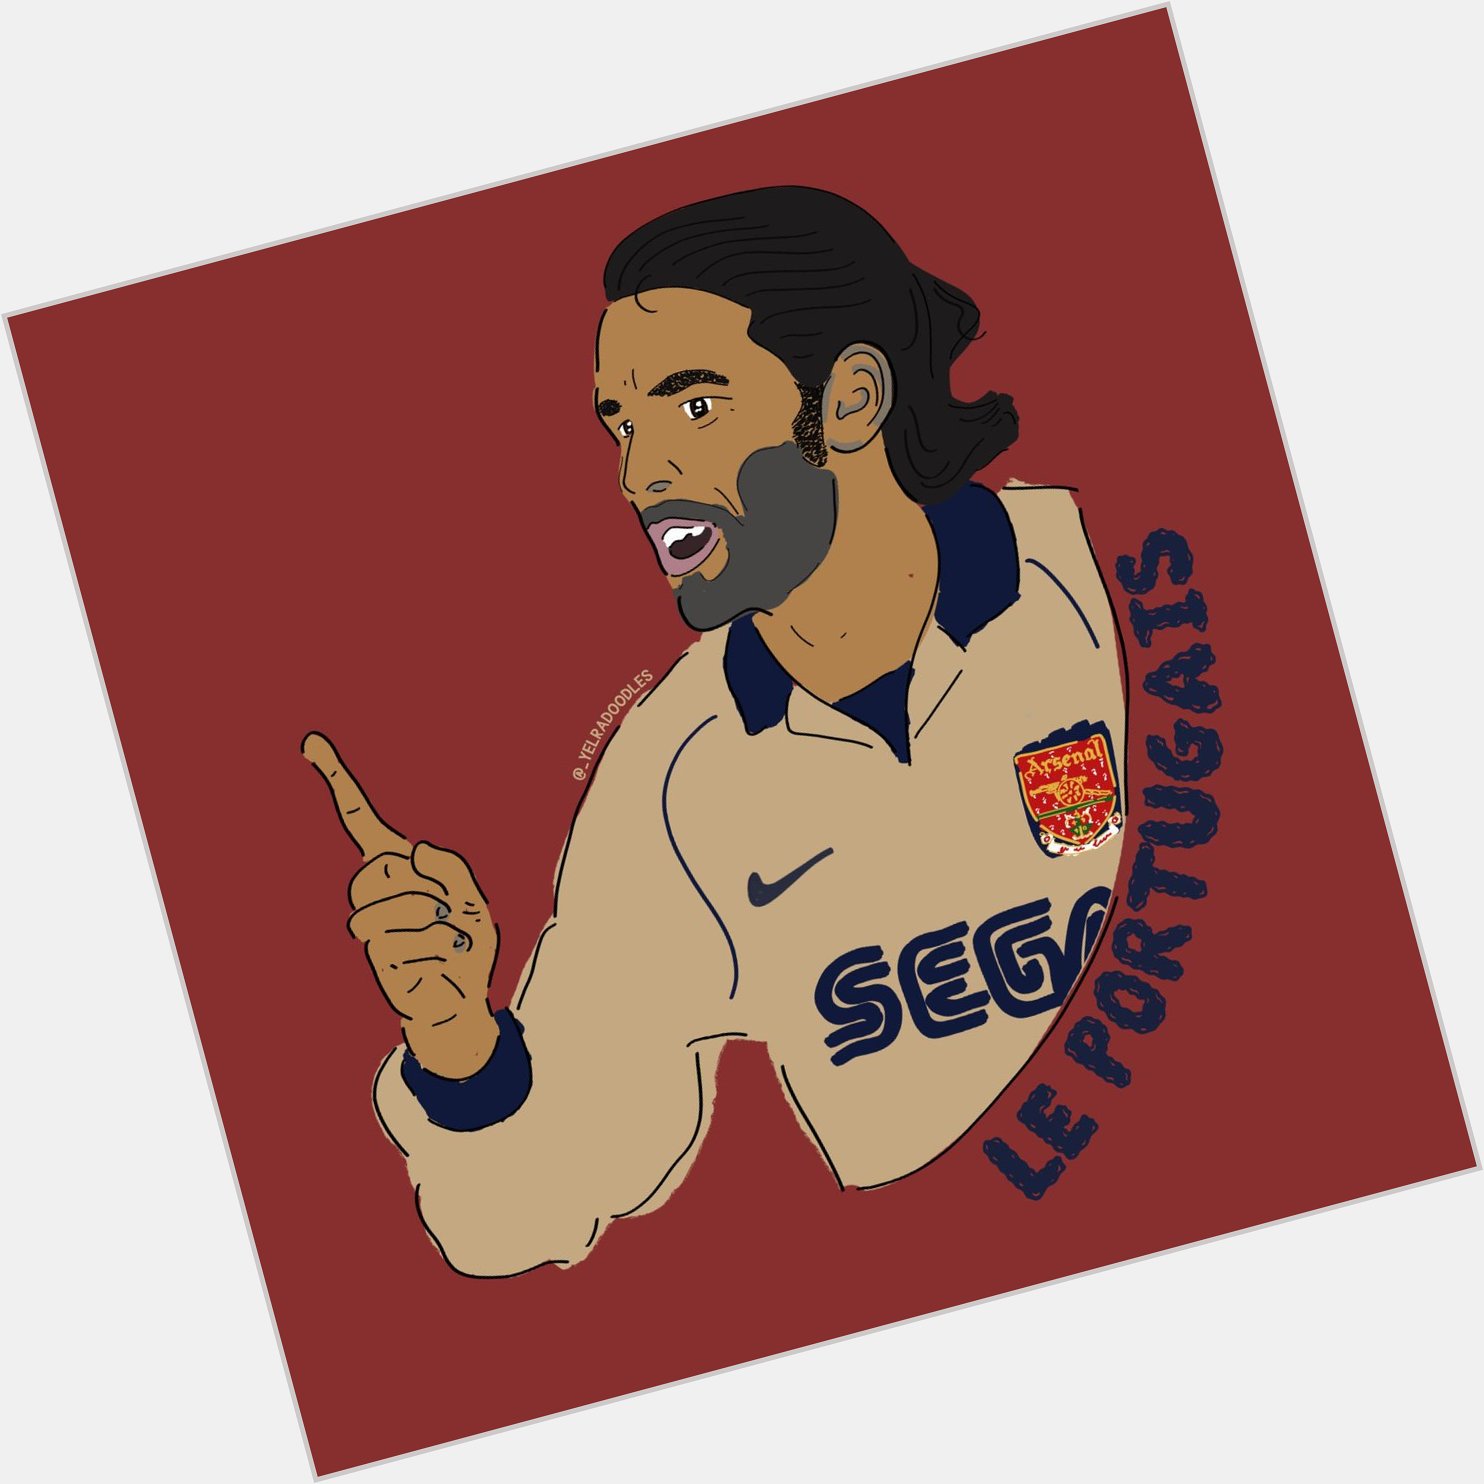 Happy Birthday Robert Pires you ol\ finger wagger you. 